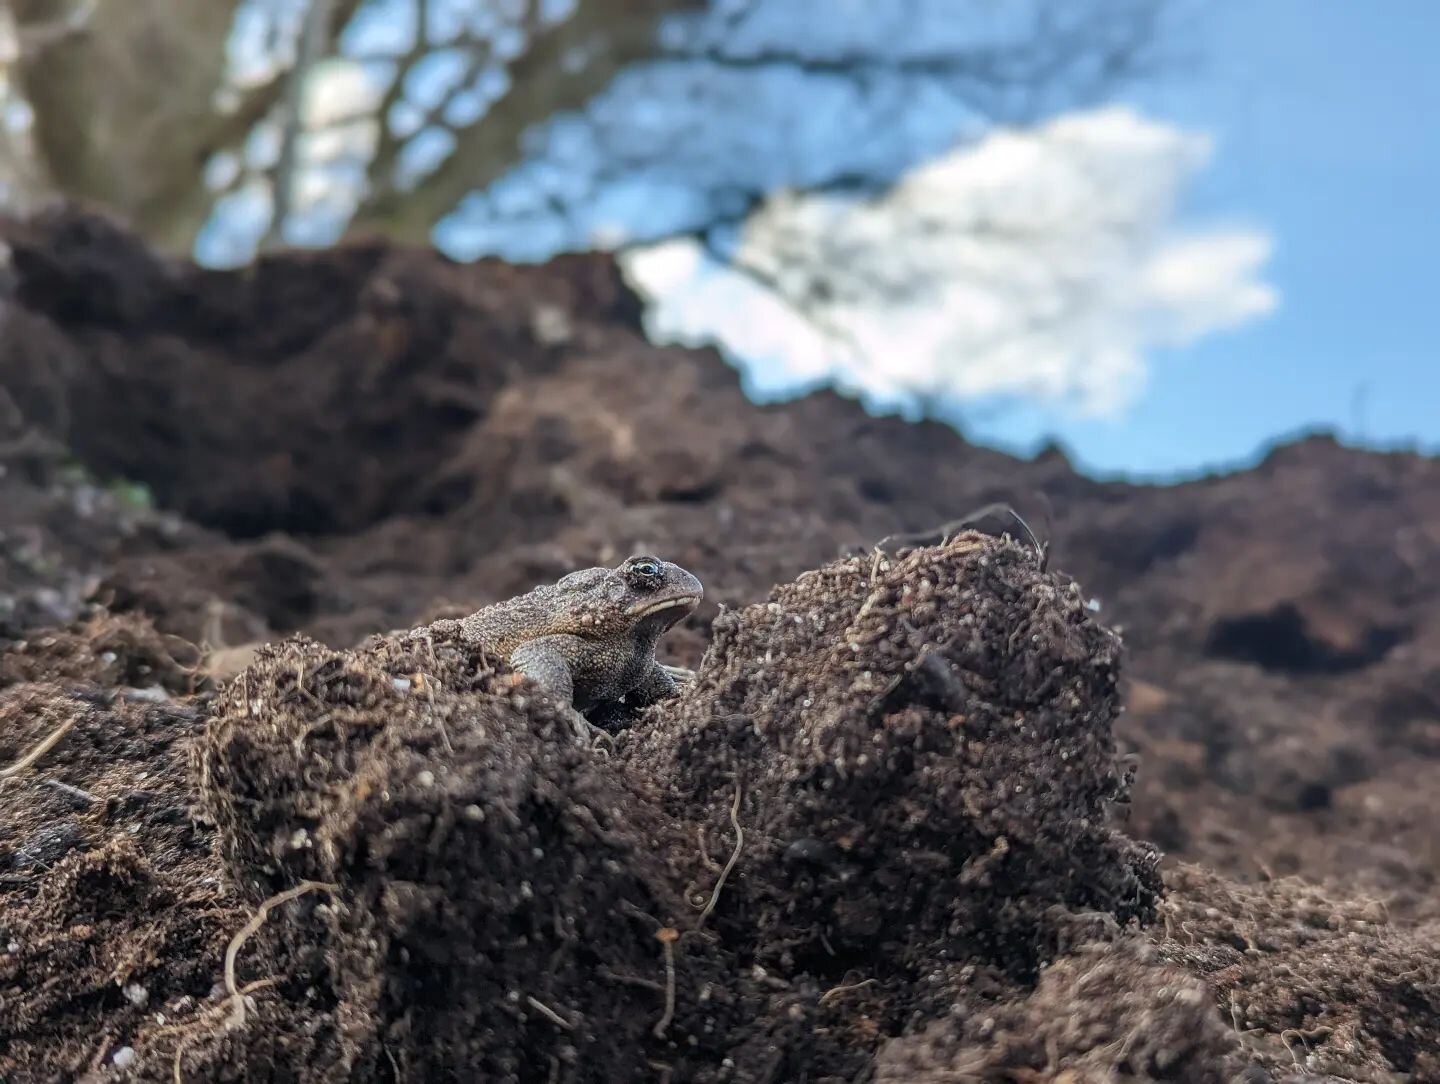 🎆Toads are in...Mother Nature's latest delivery of spring delight surfaced in the compost pile as I filled wheelbarrow after wheelbarrow to top dress the herb garden yesterday. 
 
I wonder if he was tunneled in the depths of our compost pile to wait